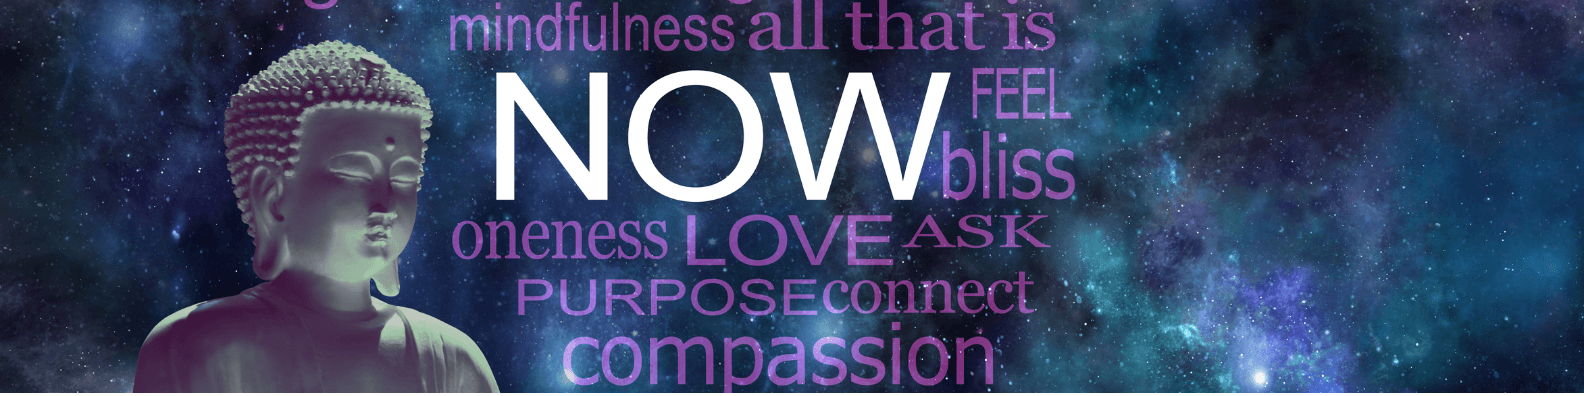 mindfulness live in the now